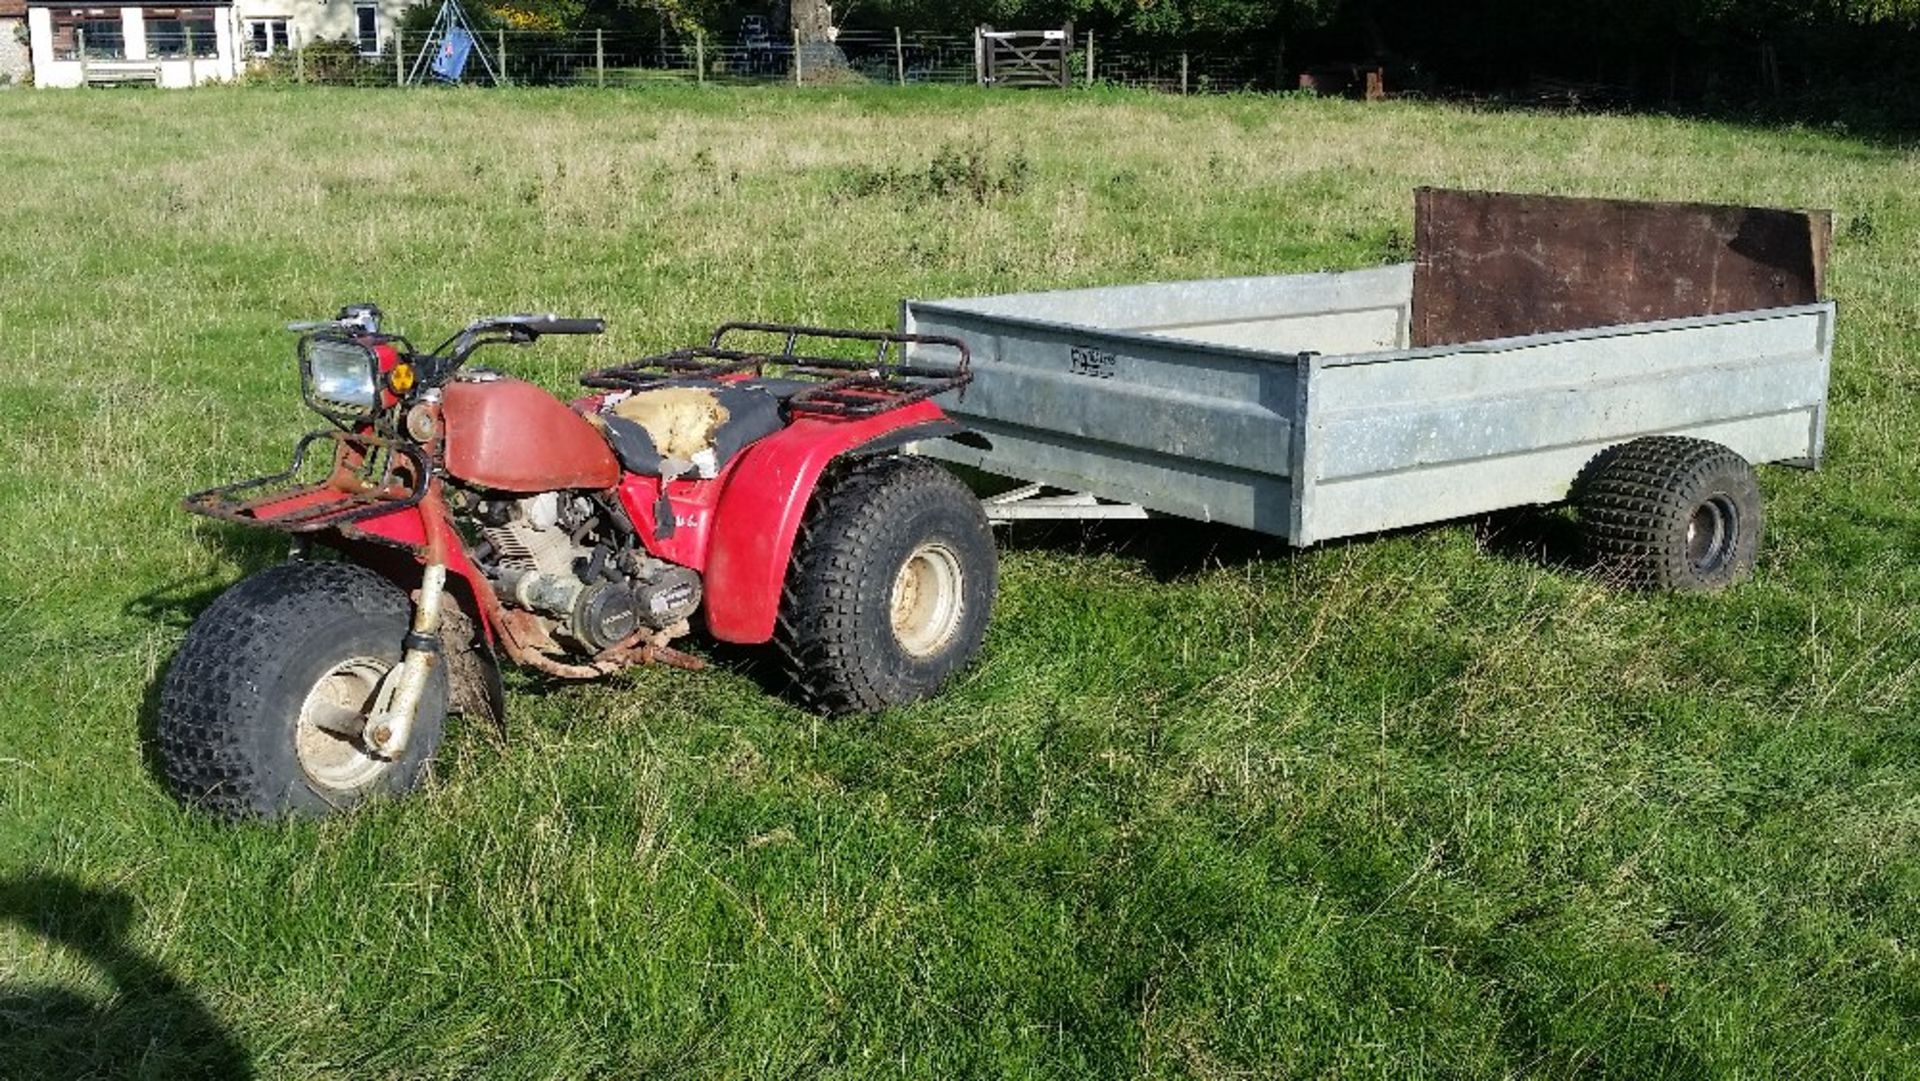 Large quad trailer Stored near Hyde End, Great Missenden, Buckinghamshire No VAT on this item.